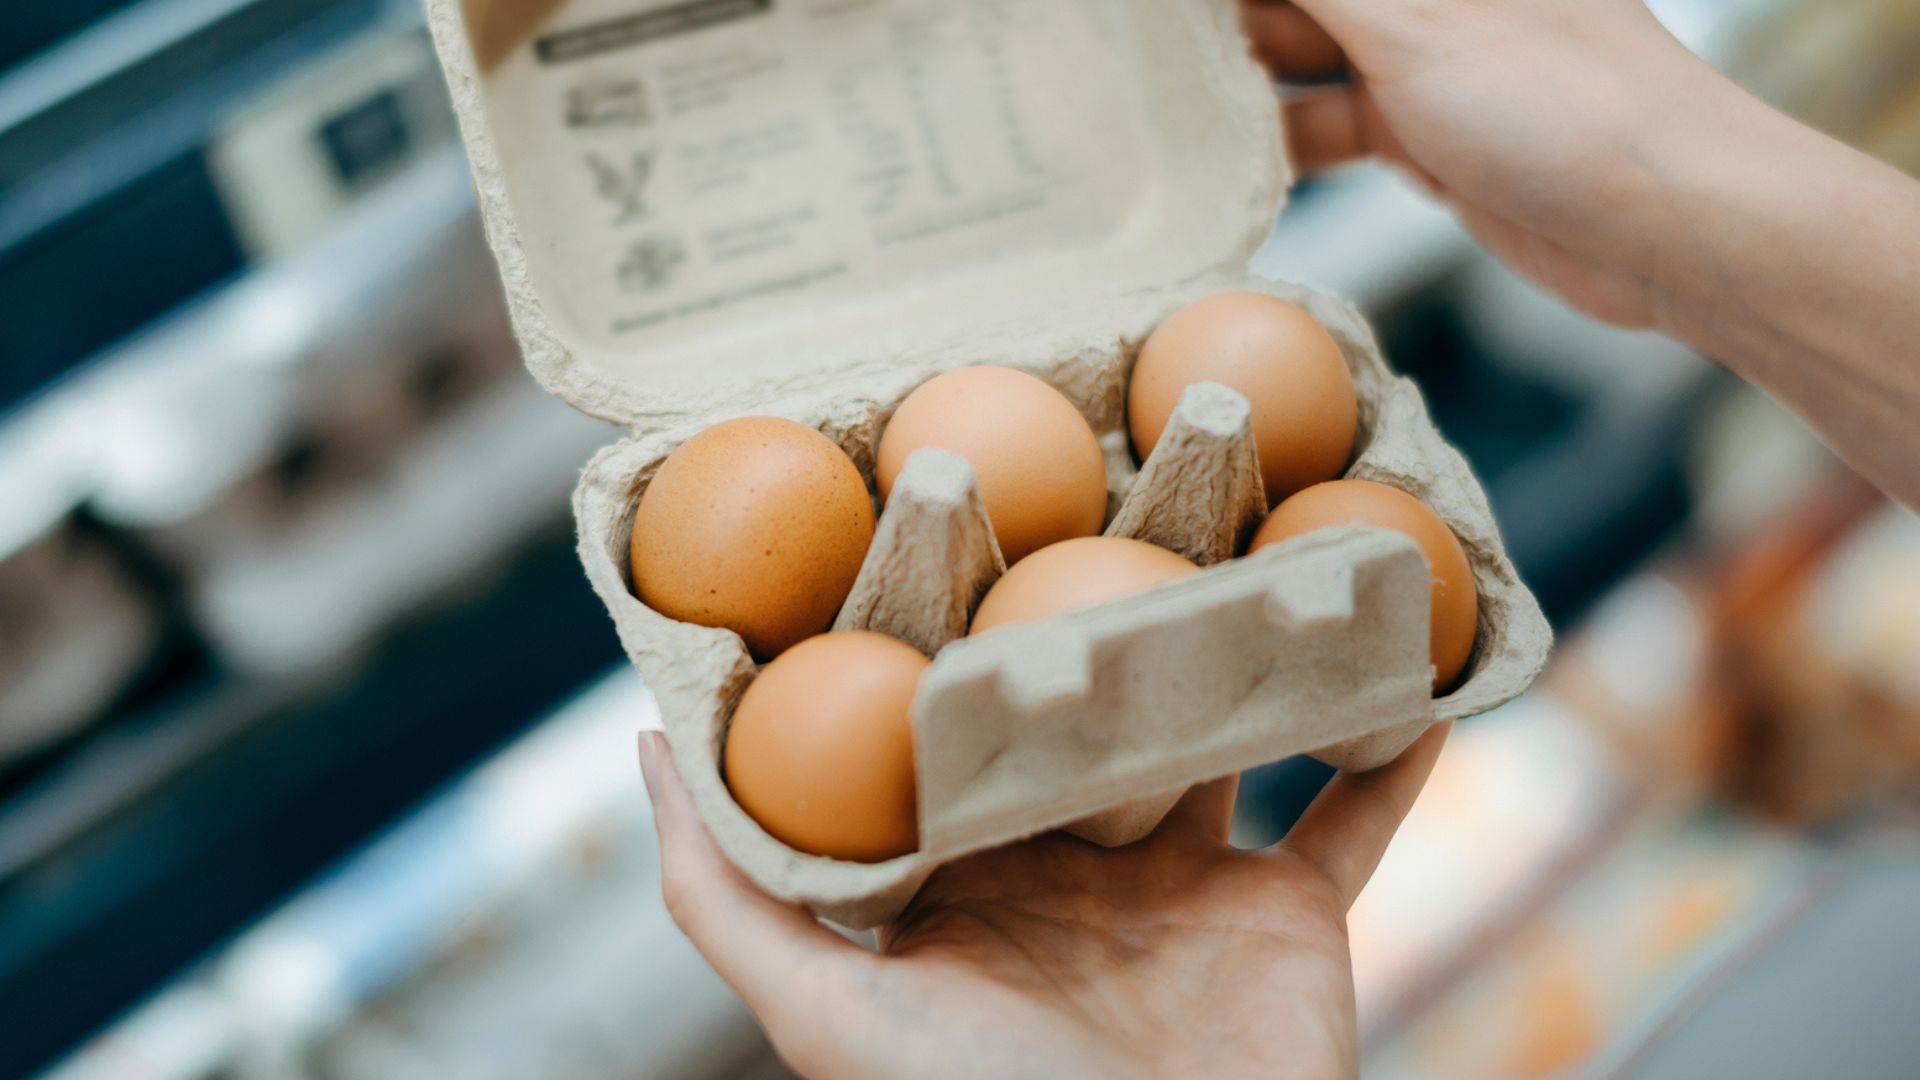 Woman's hands opening cardboard box of eggs